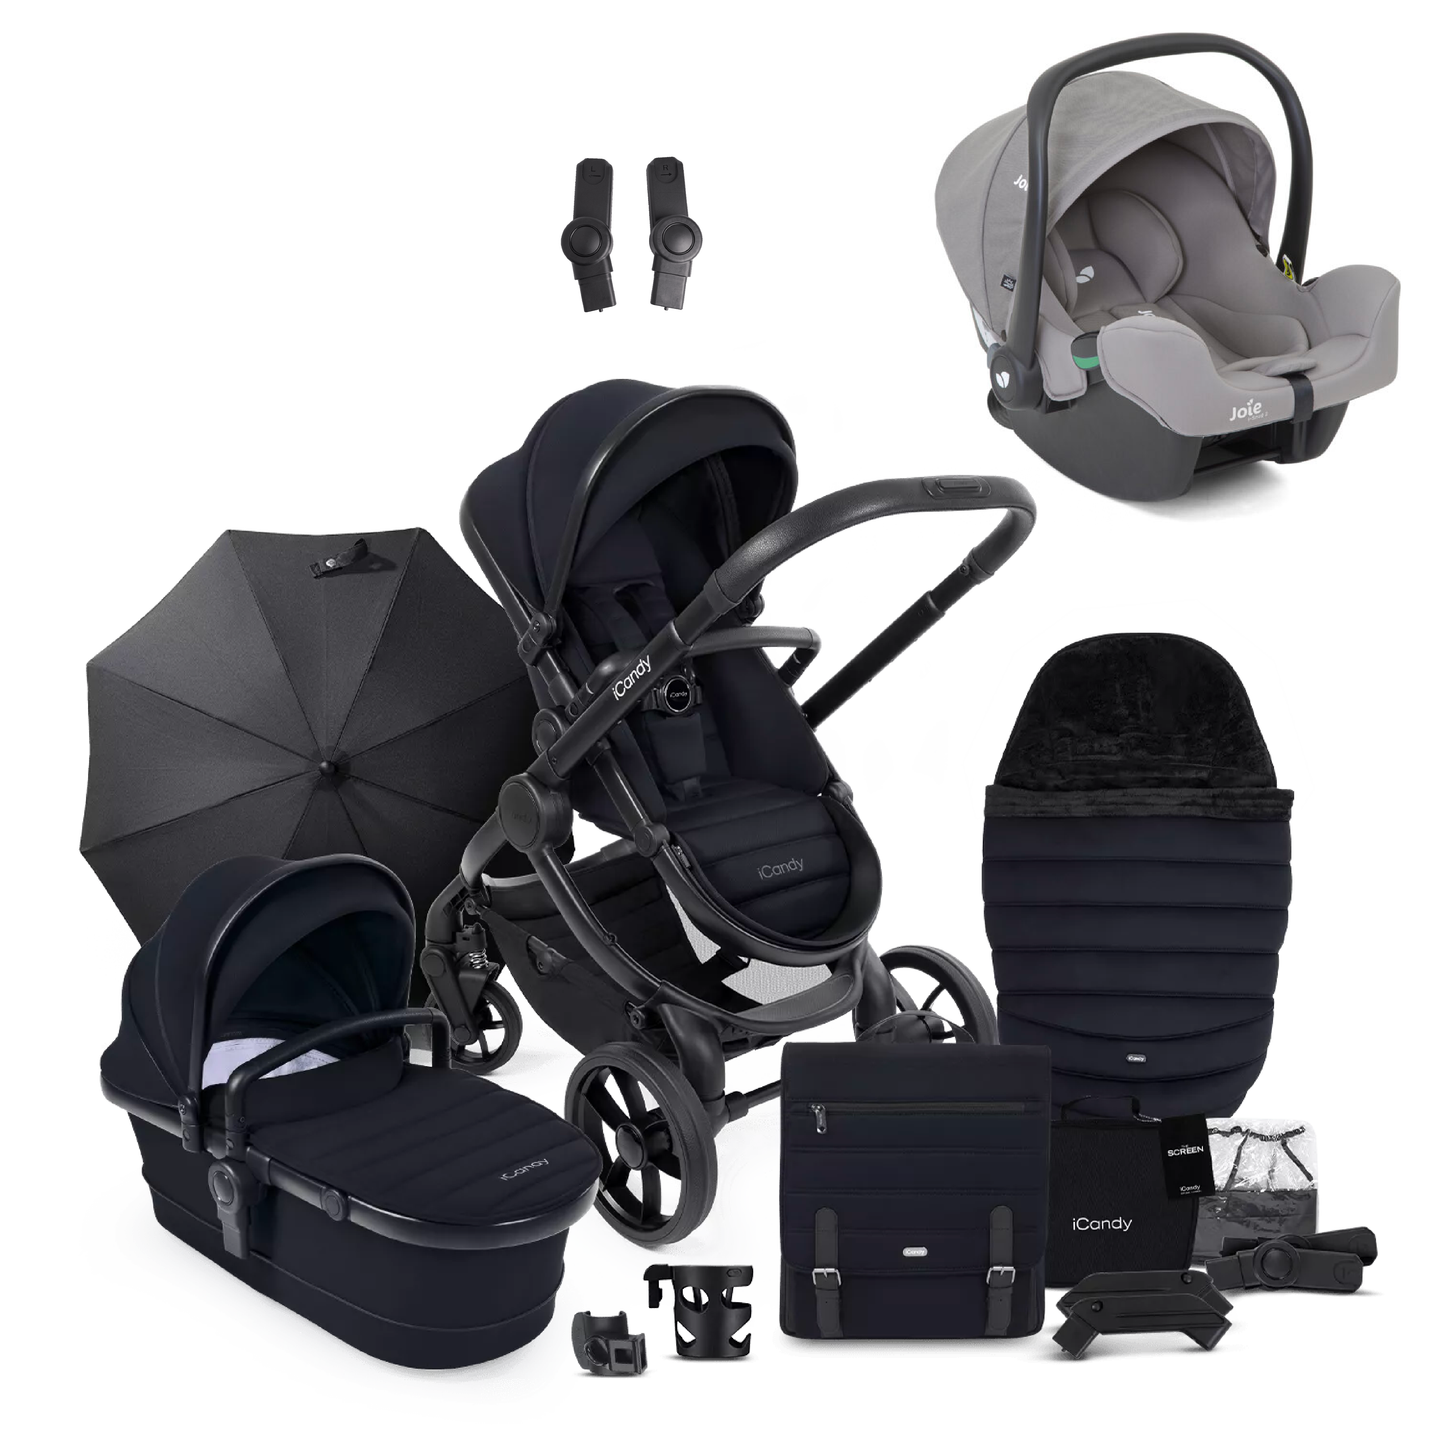 iCandy Peach 7 Bundle with Joie iSnug 2 iSize Car Seat